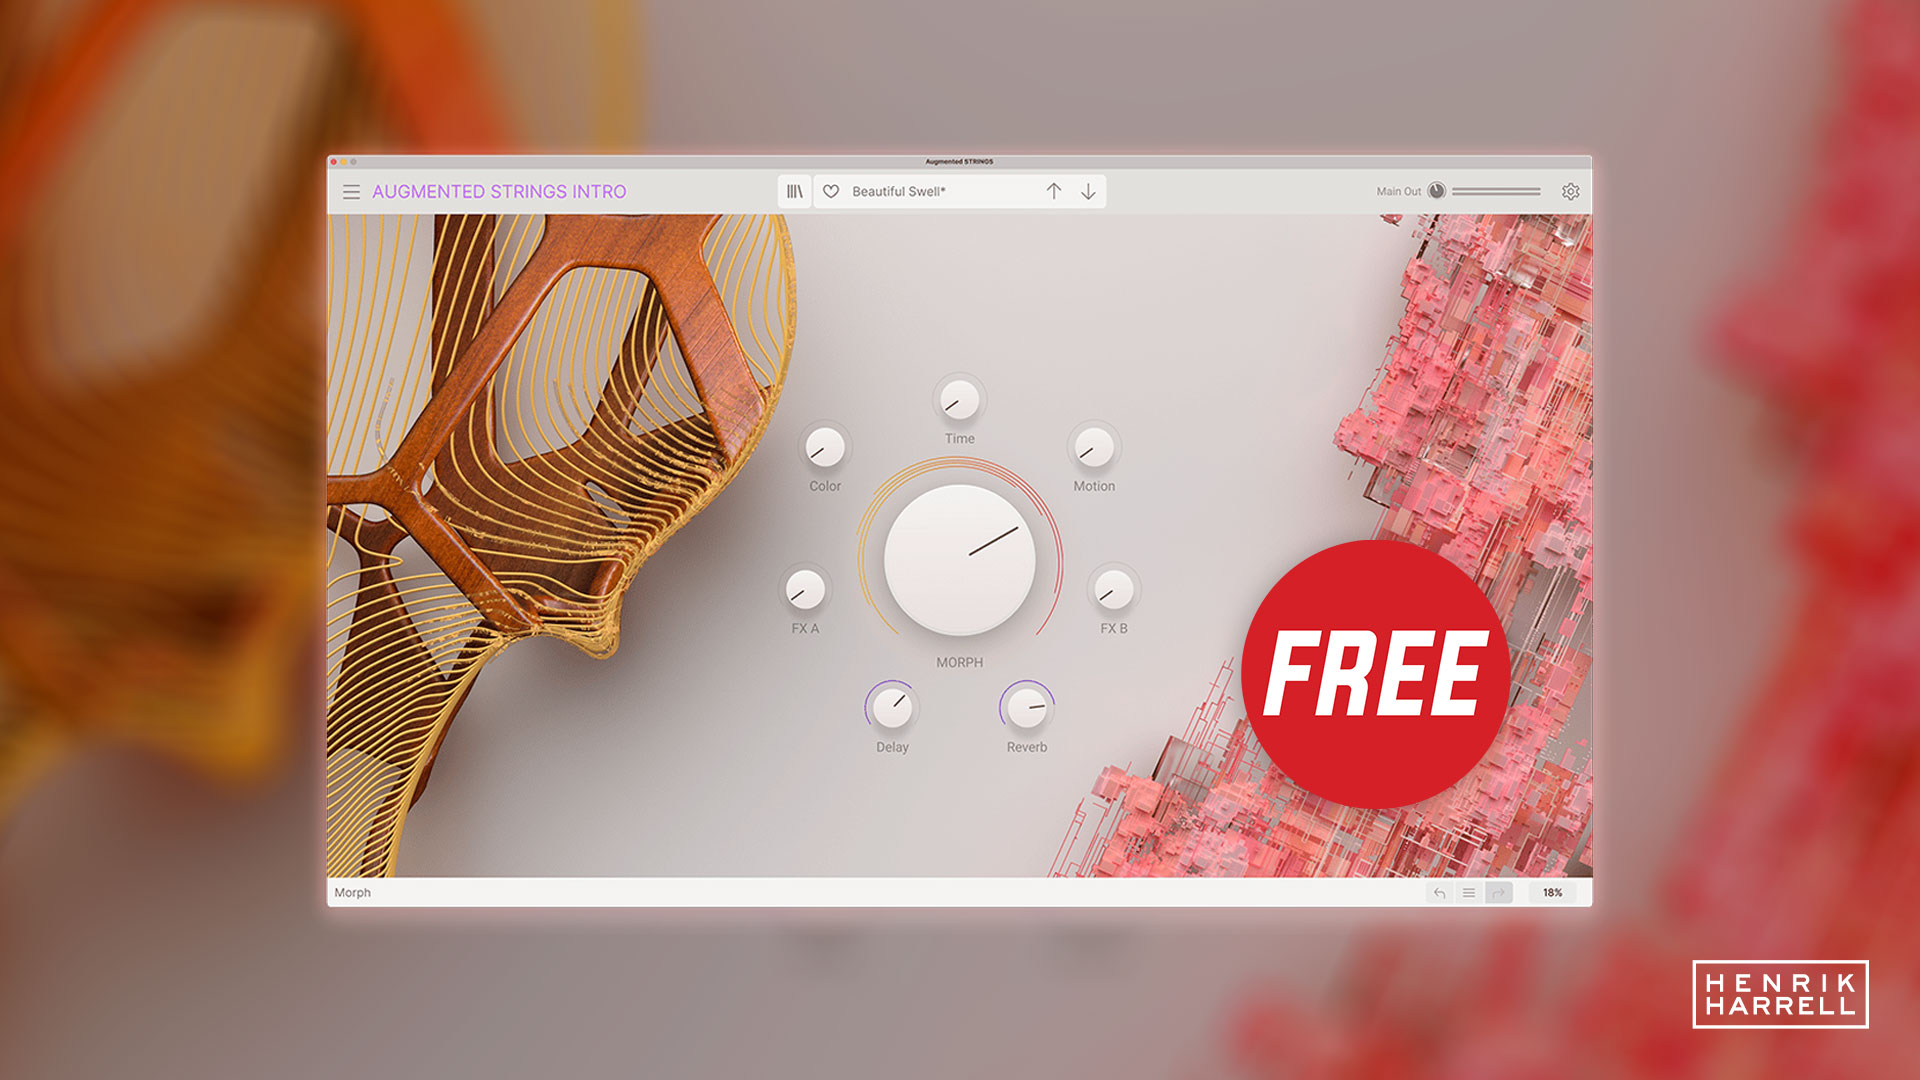 Arturia releases Augmented STRINGS Intro: a free VST Plugin for a limited time